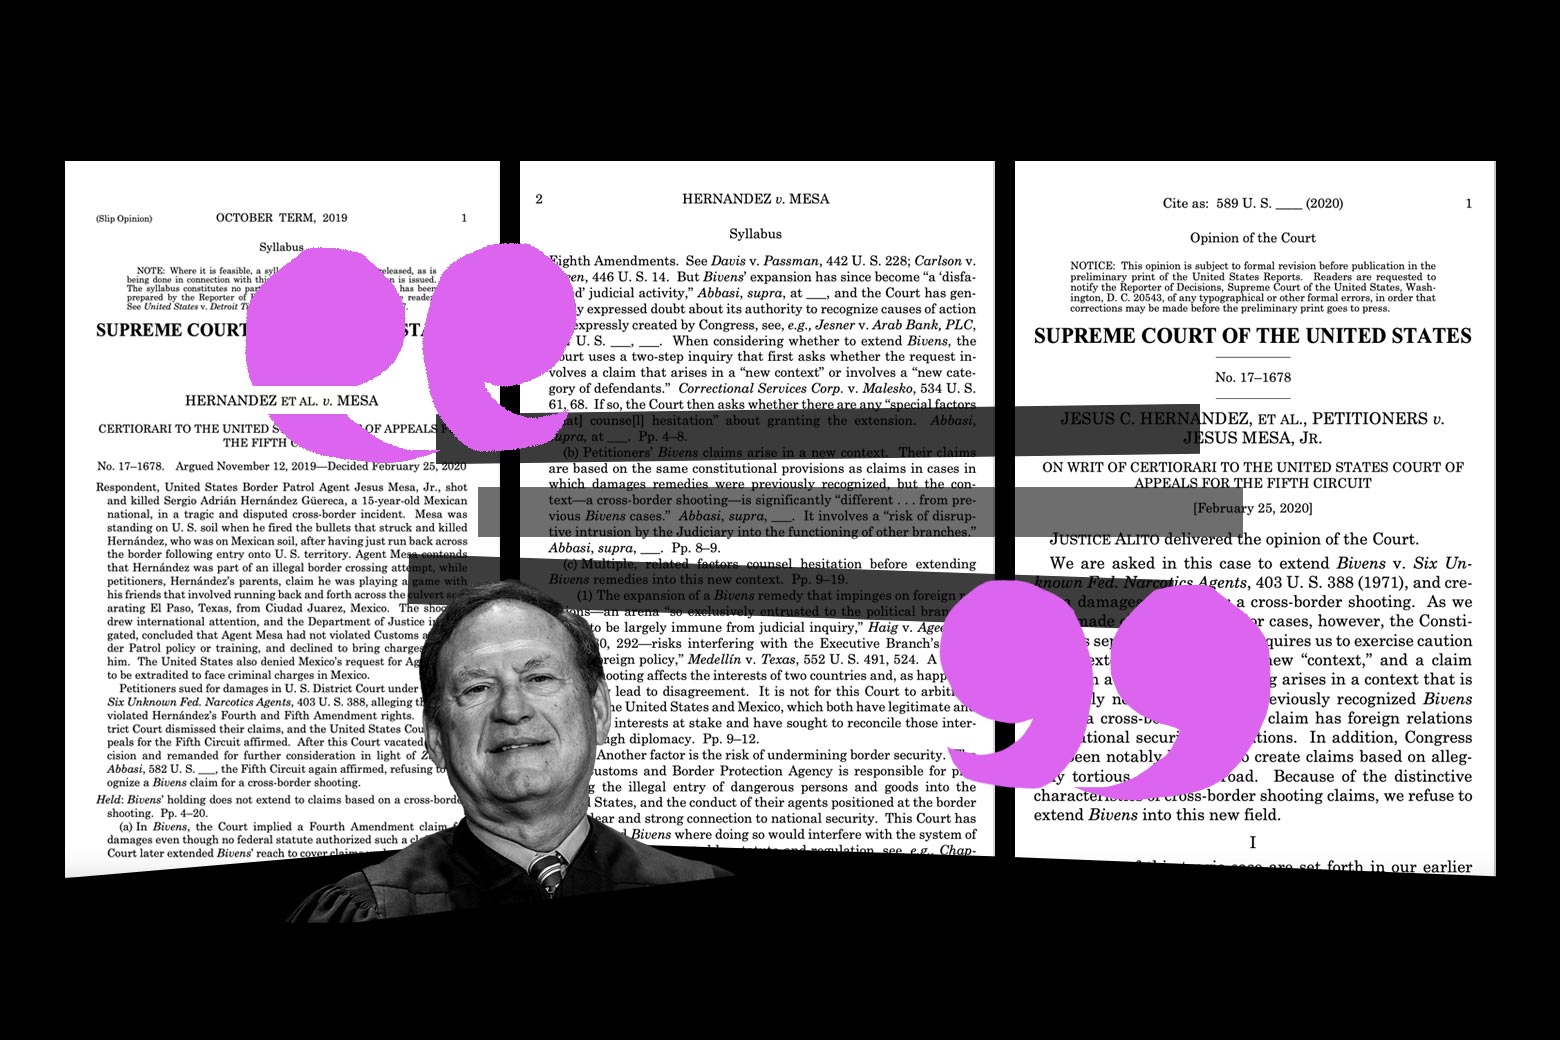 Stylized quotation marks and the faces of SCOTUS justices are superimposed over the text of the Hernandez v. Mesa decision.